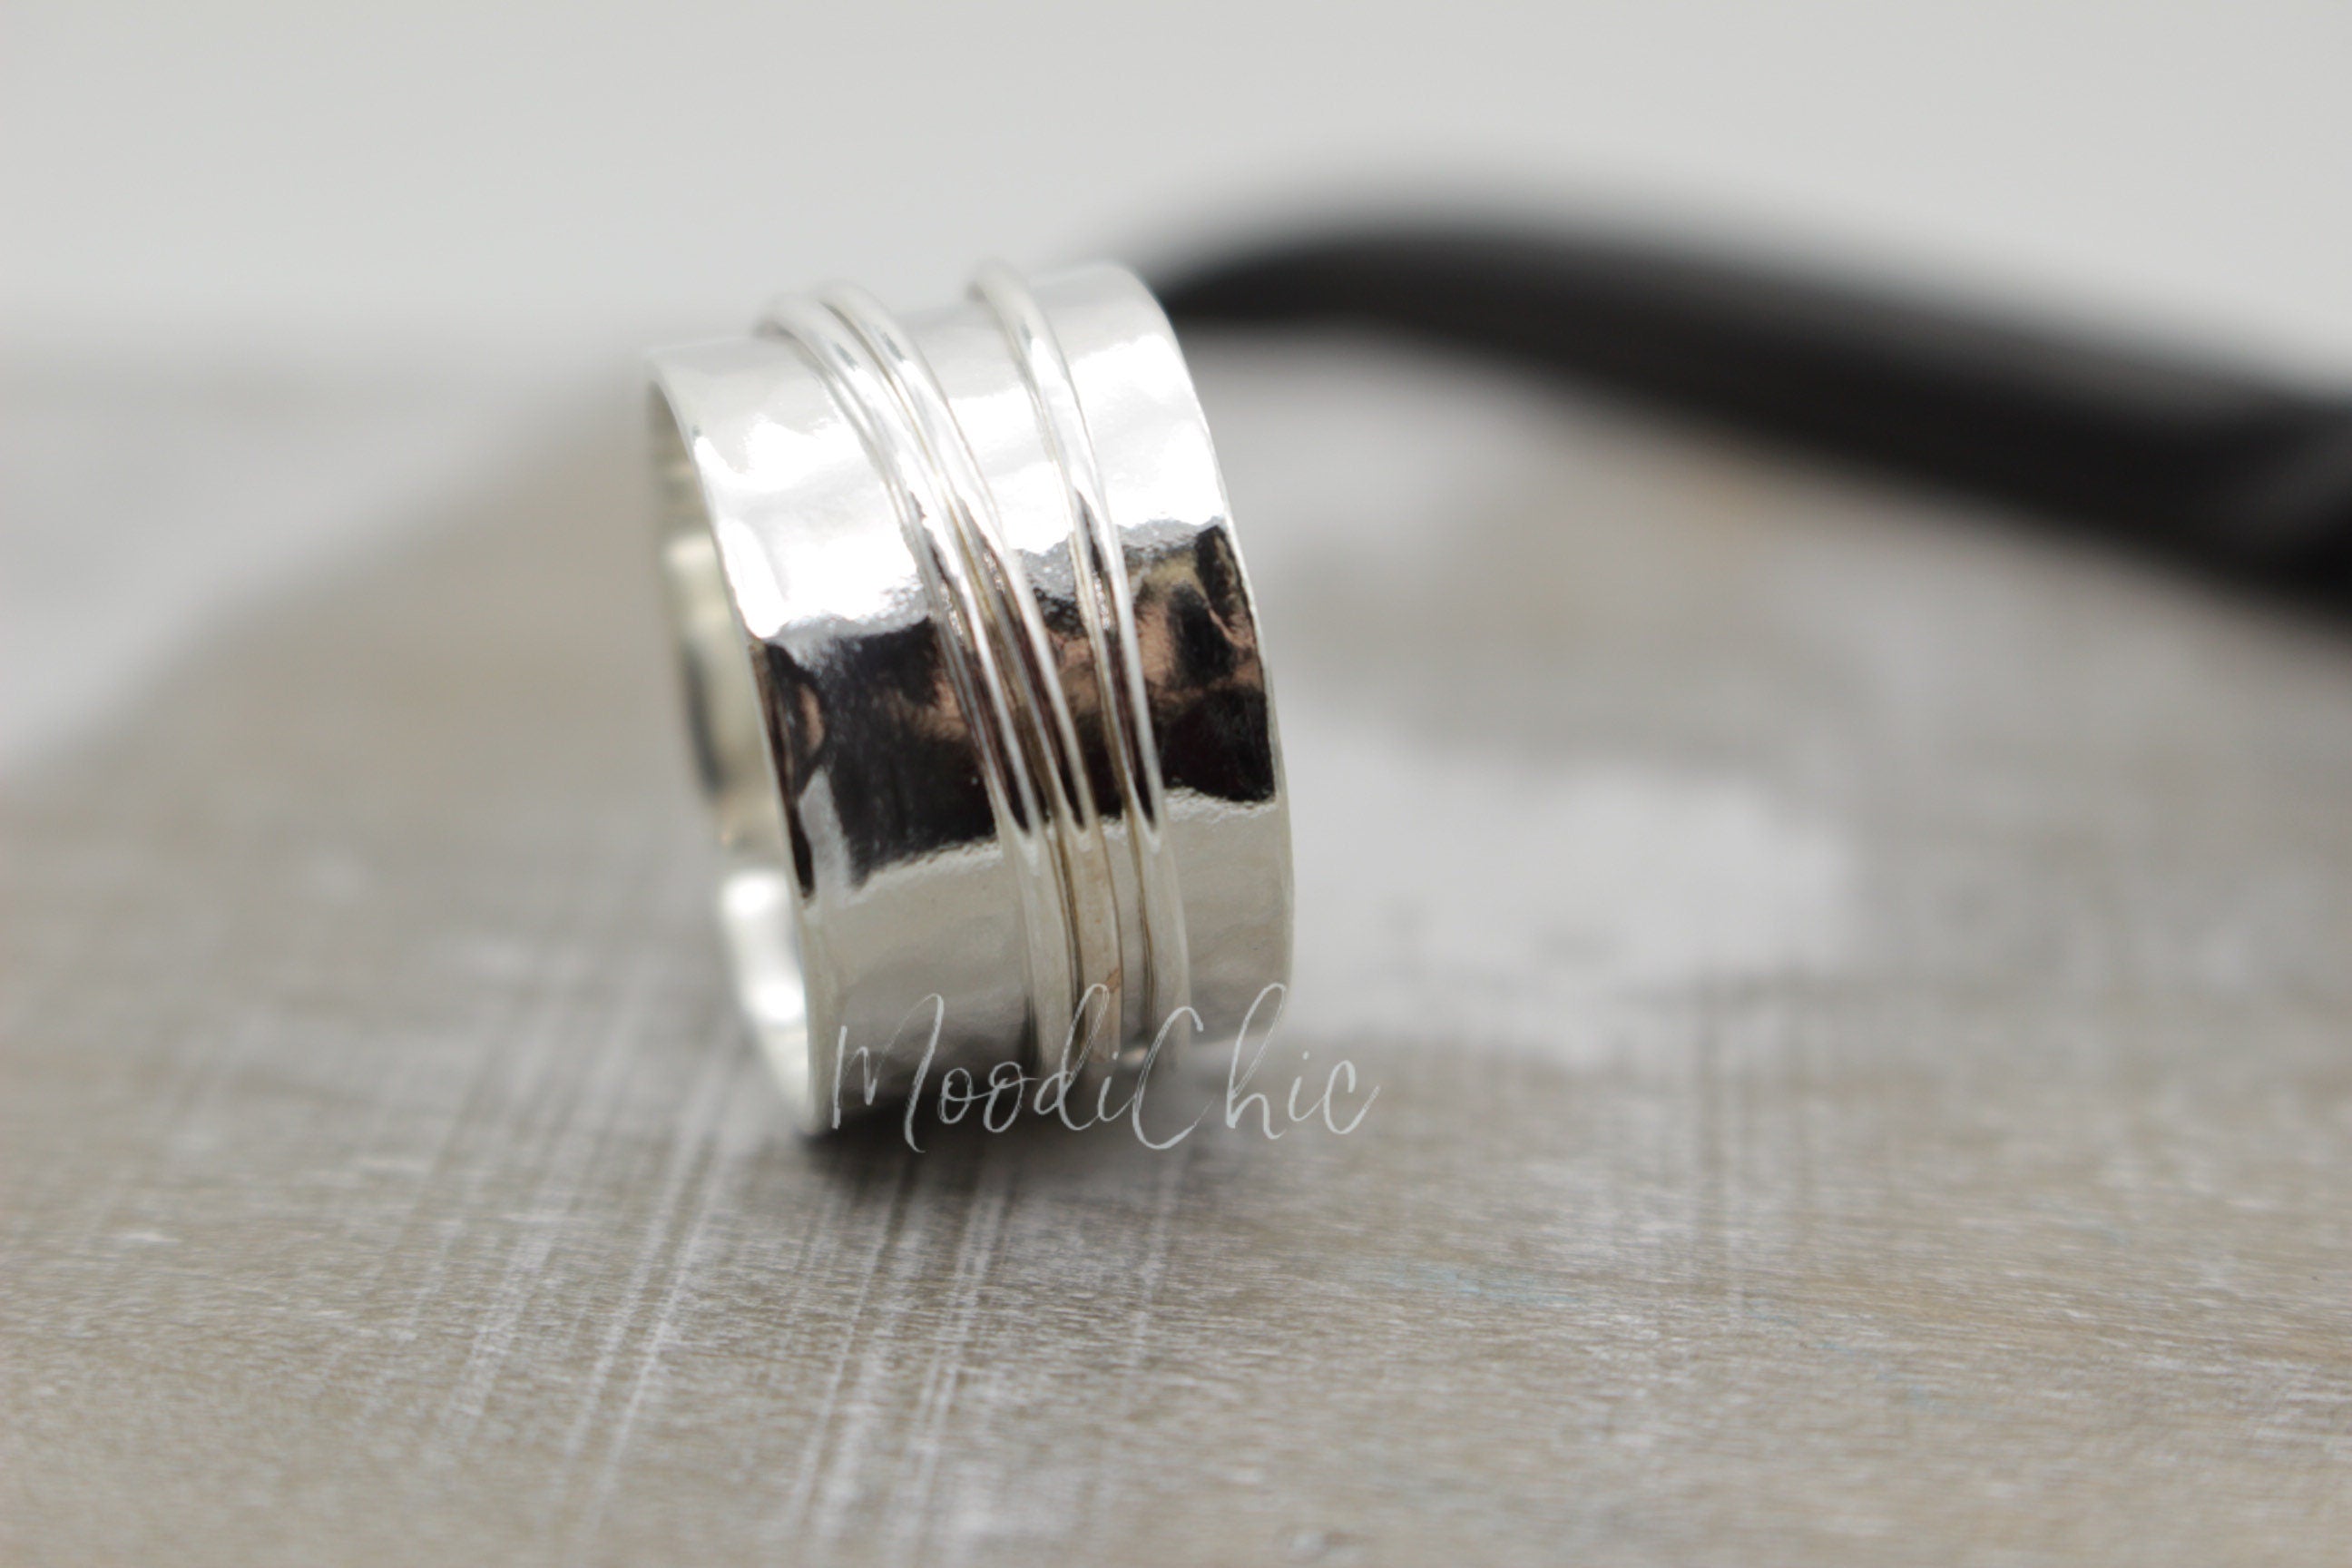 Sterling silver spinner ring- wide band silver ring - meditation ring - gifts for her - jewelry sale